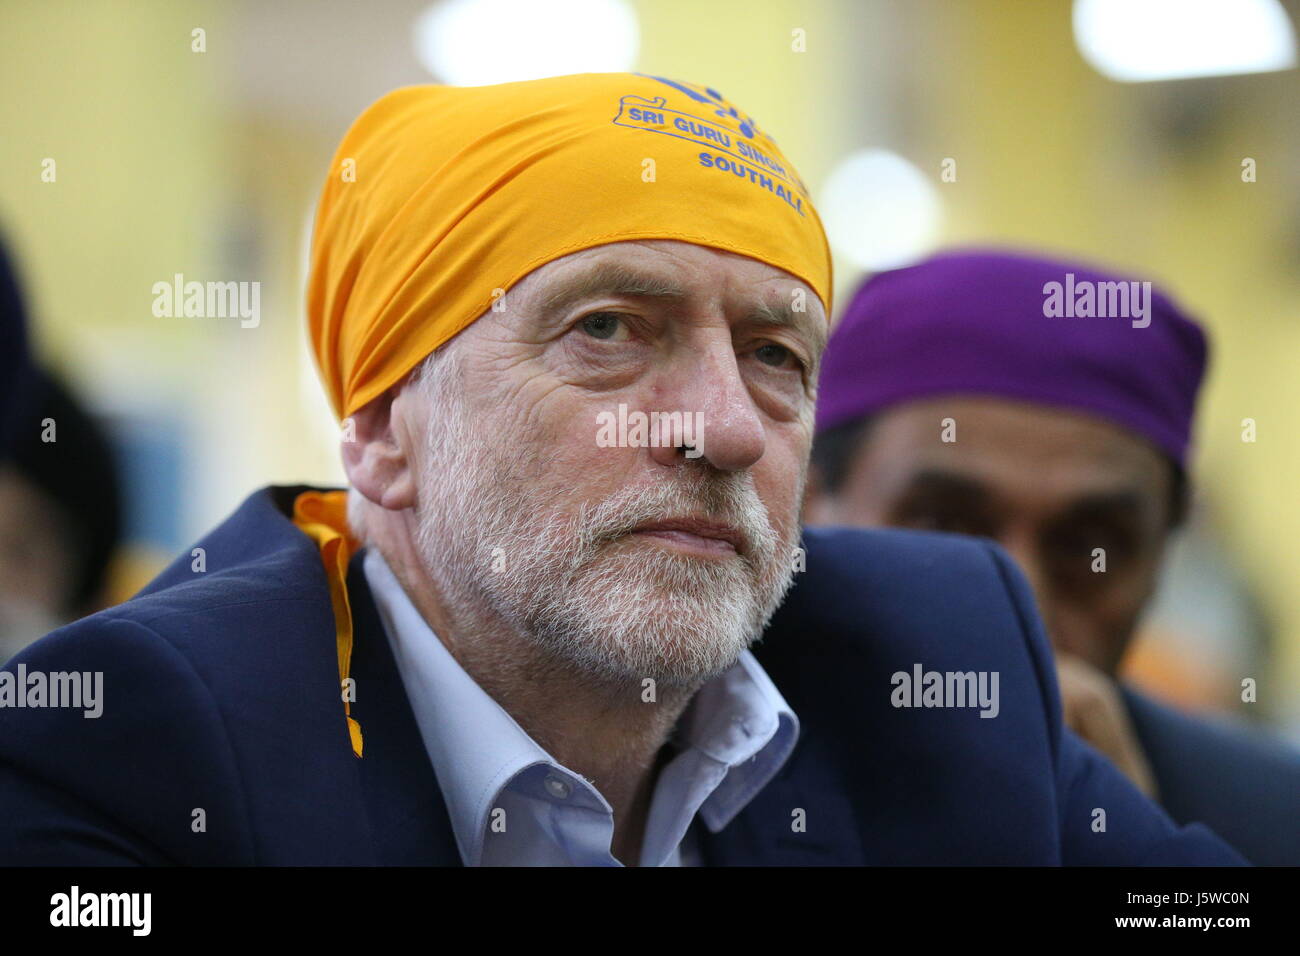 Labour leader Jeremy Corbyn joins worshippers at the Sri Guru Singh Sabha in Southall, London, during a general election campaign visit. Stock Photo